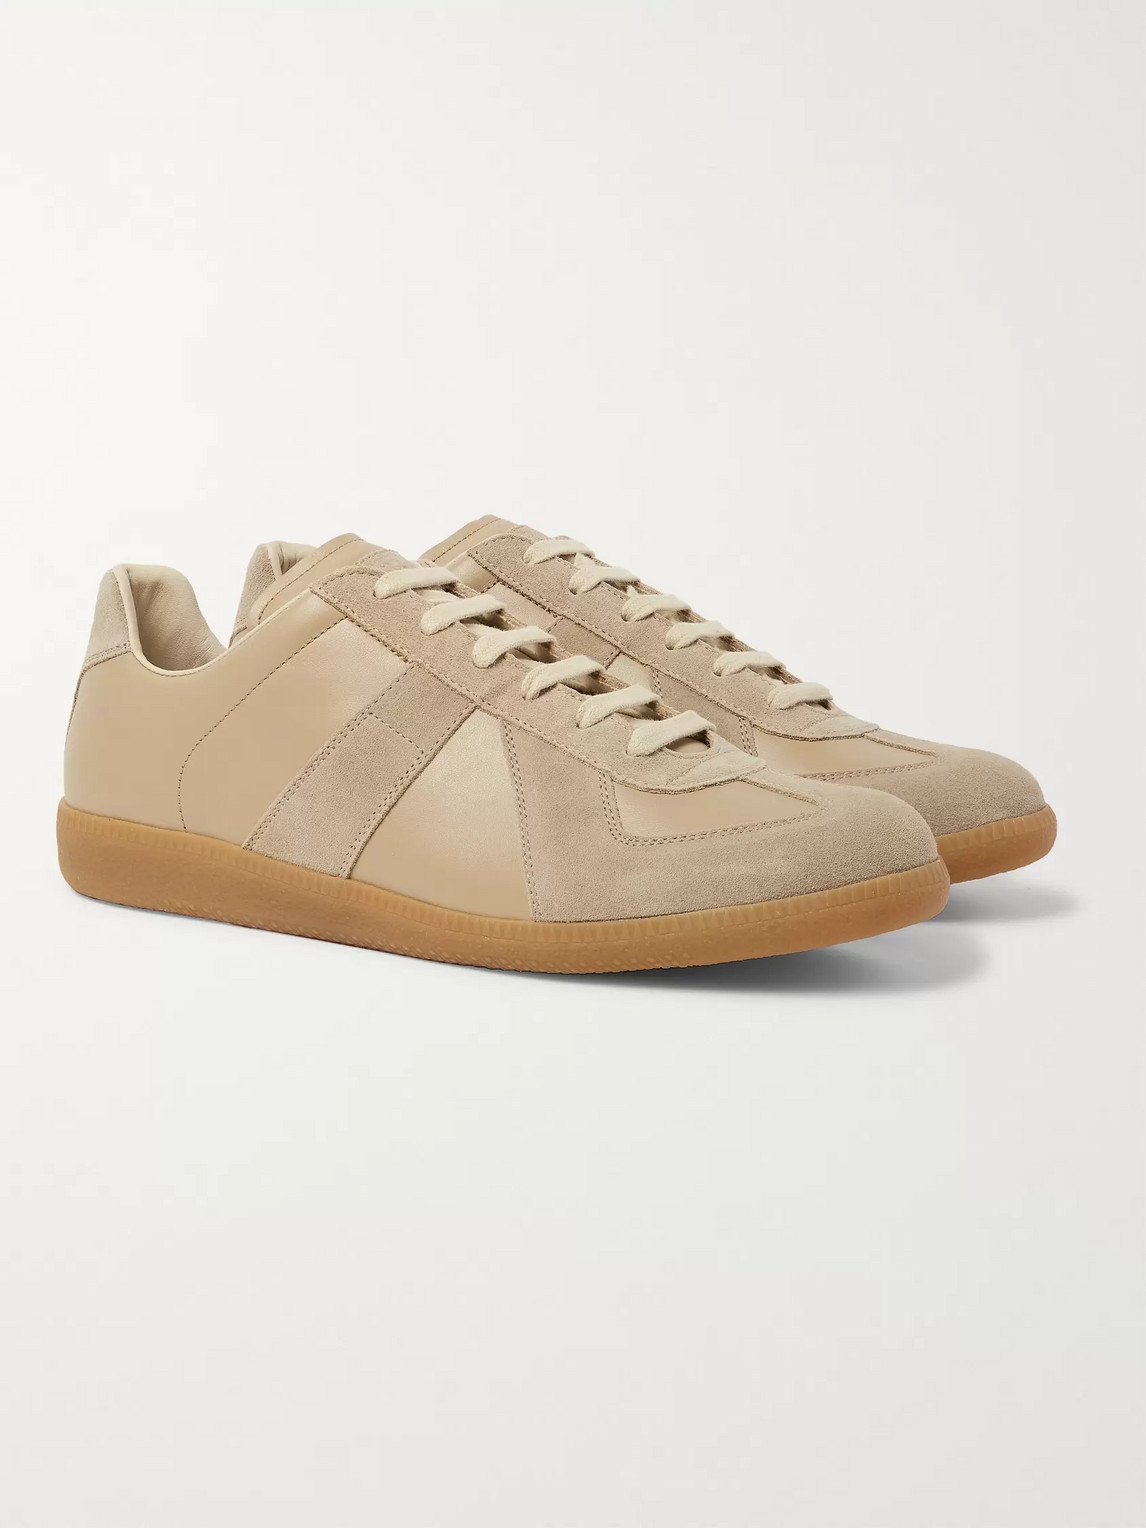 MAISON MARGIELA REPLICA SUEDE AND LEATHER SNEAKERS